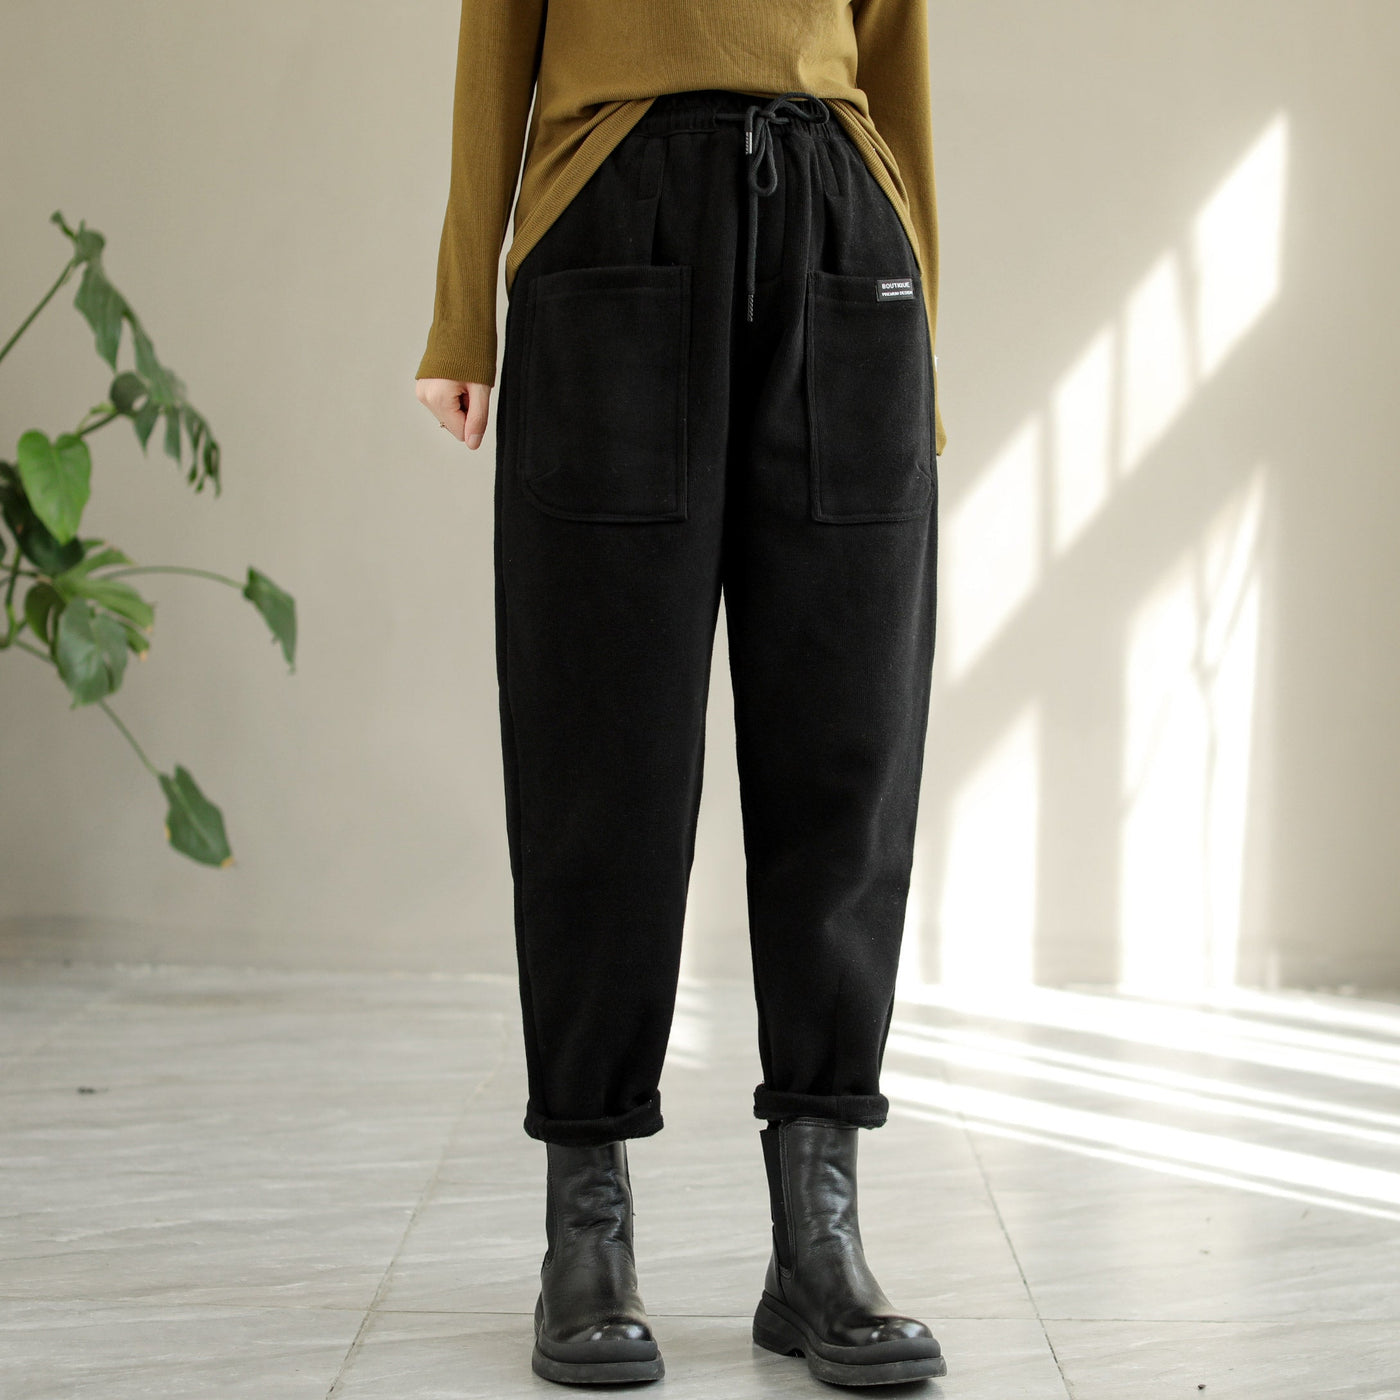 Women Winter Cotton Furred Solid Pants Oct 2022 New Arrival M Black 